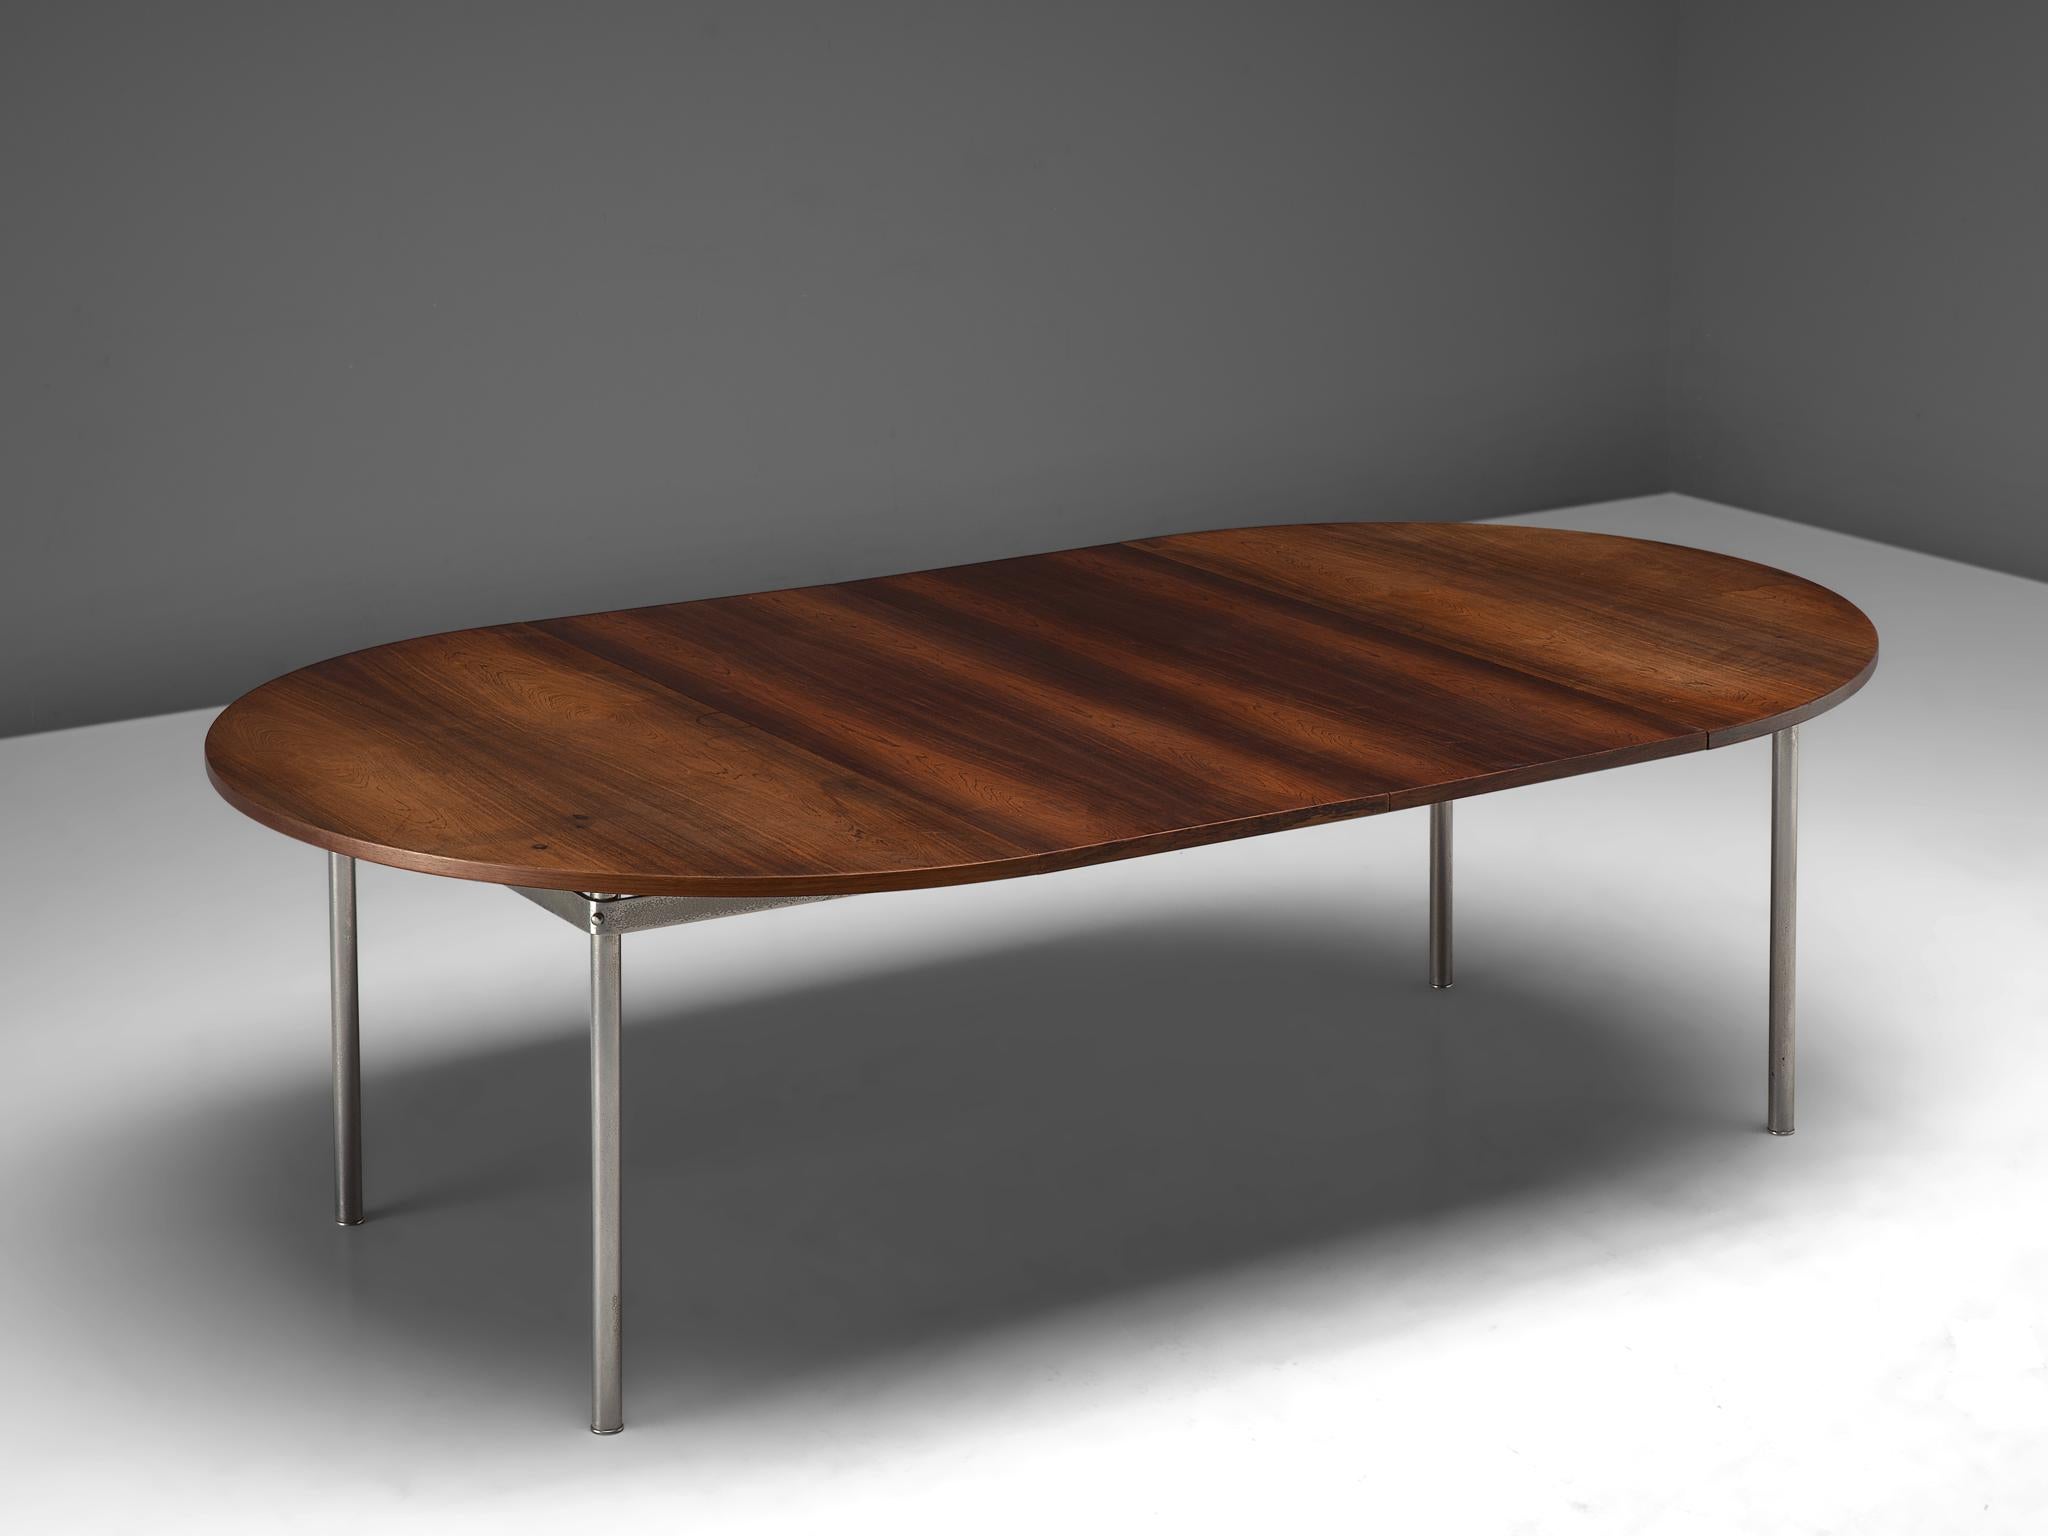 Hans Wegner for Andreas Tuck, extendable dining table, rosewood met metal, Denmark, 1961.

This round centre table with extension leaves is designed by Hans Wegner. The Danish design table consists of a chromed metal frame and features four